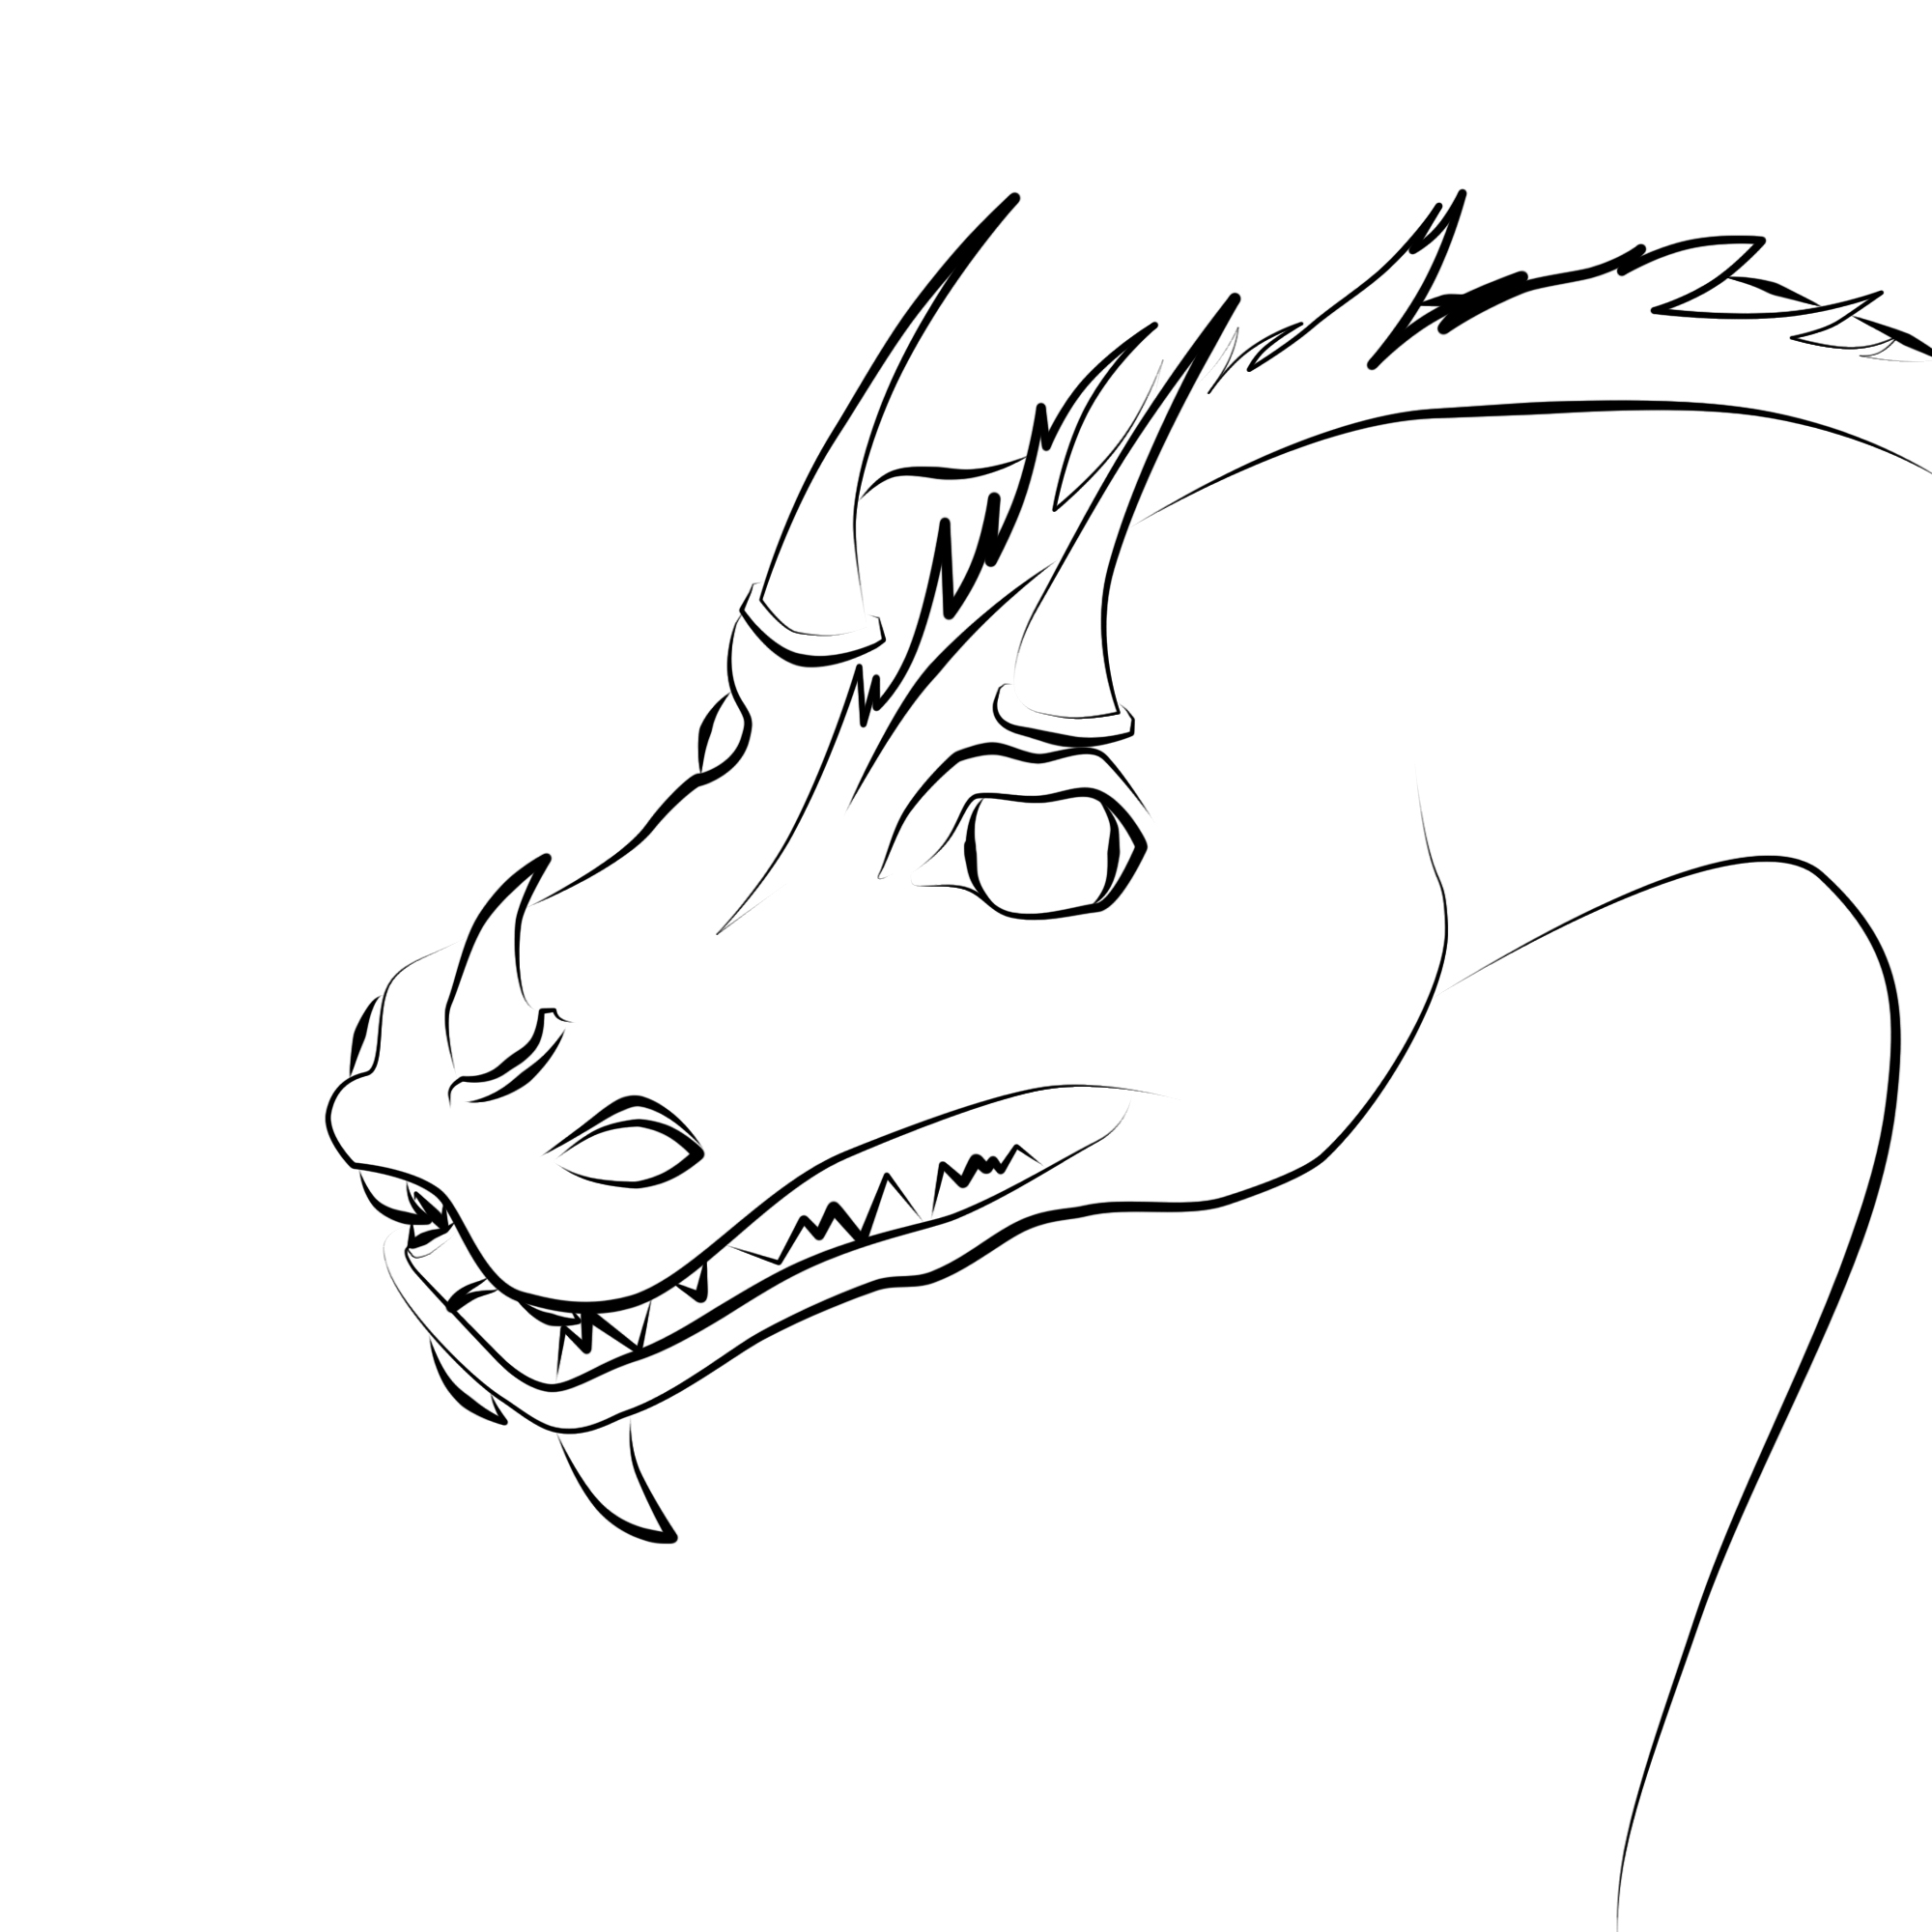 NEW LINE DRAWING DRAGONS | Drawing Tips 3